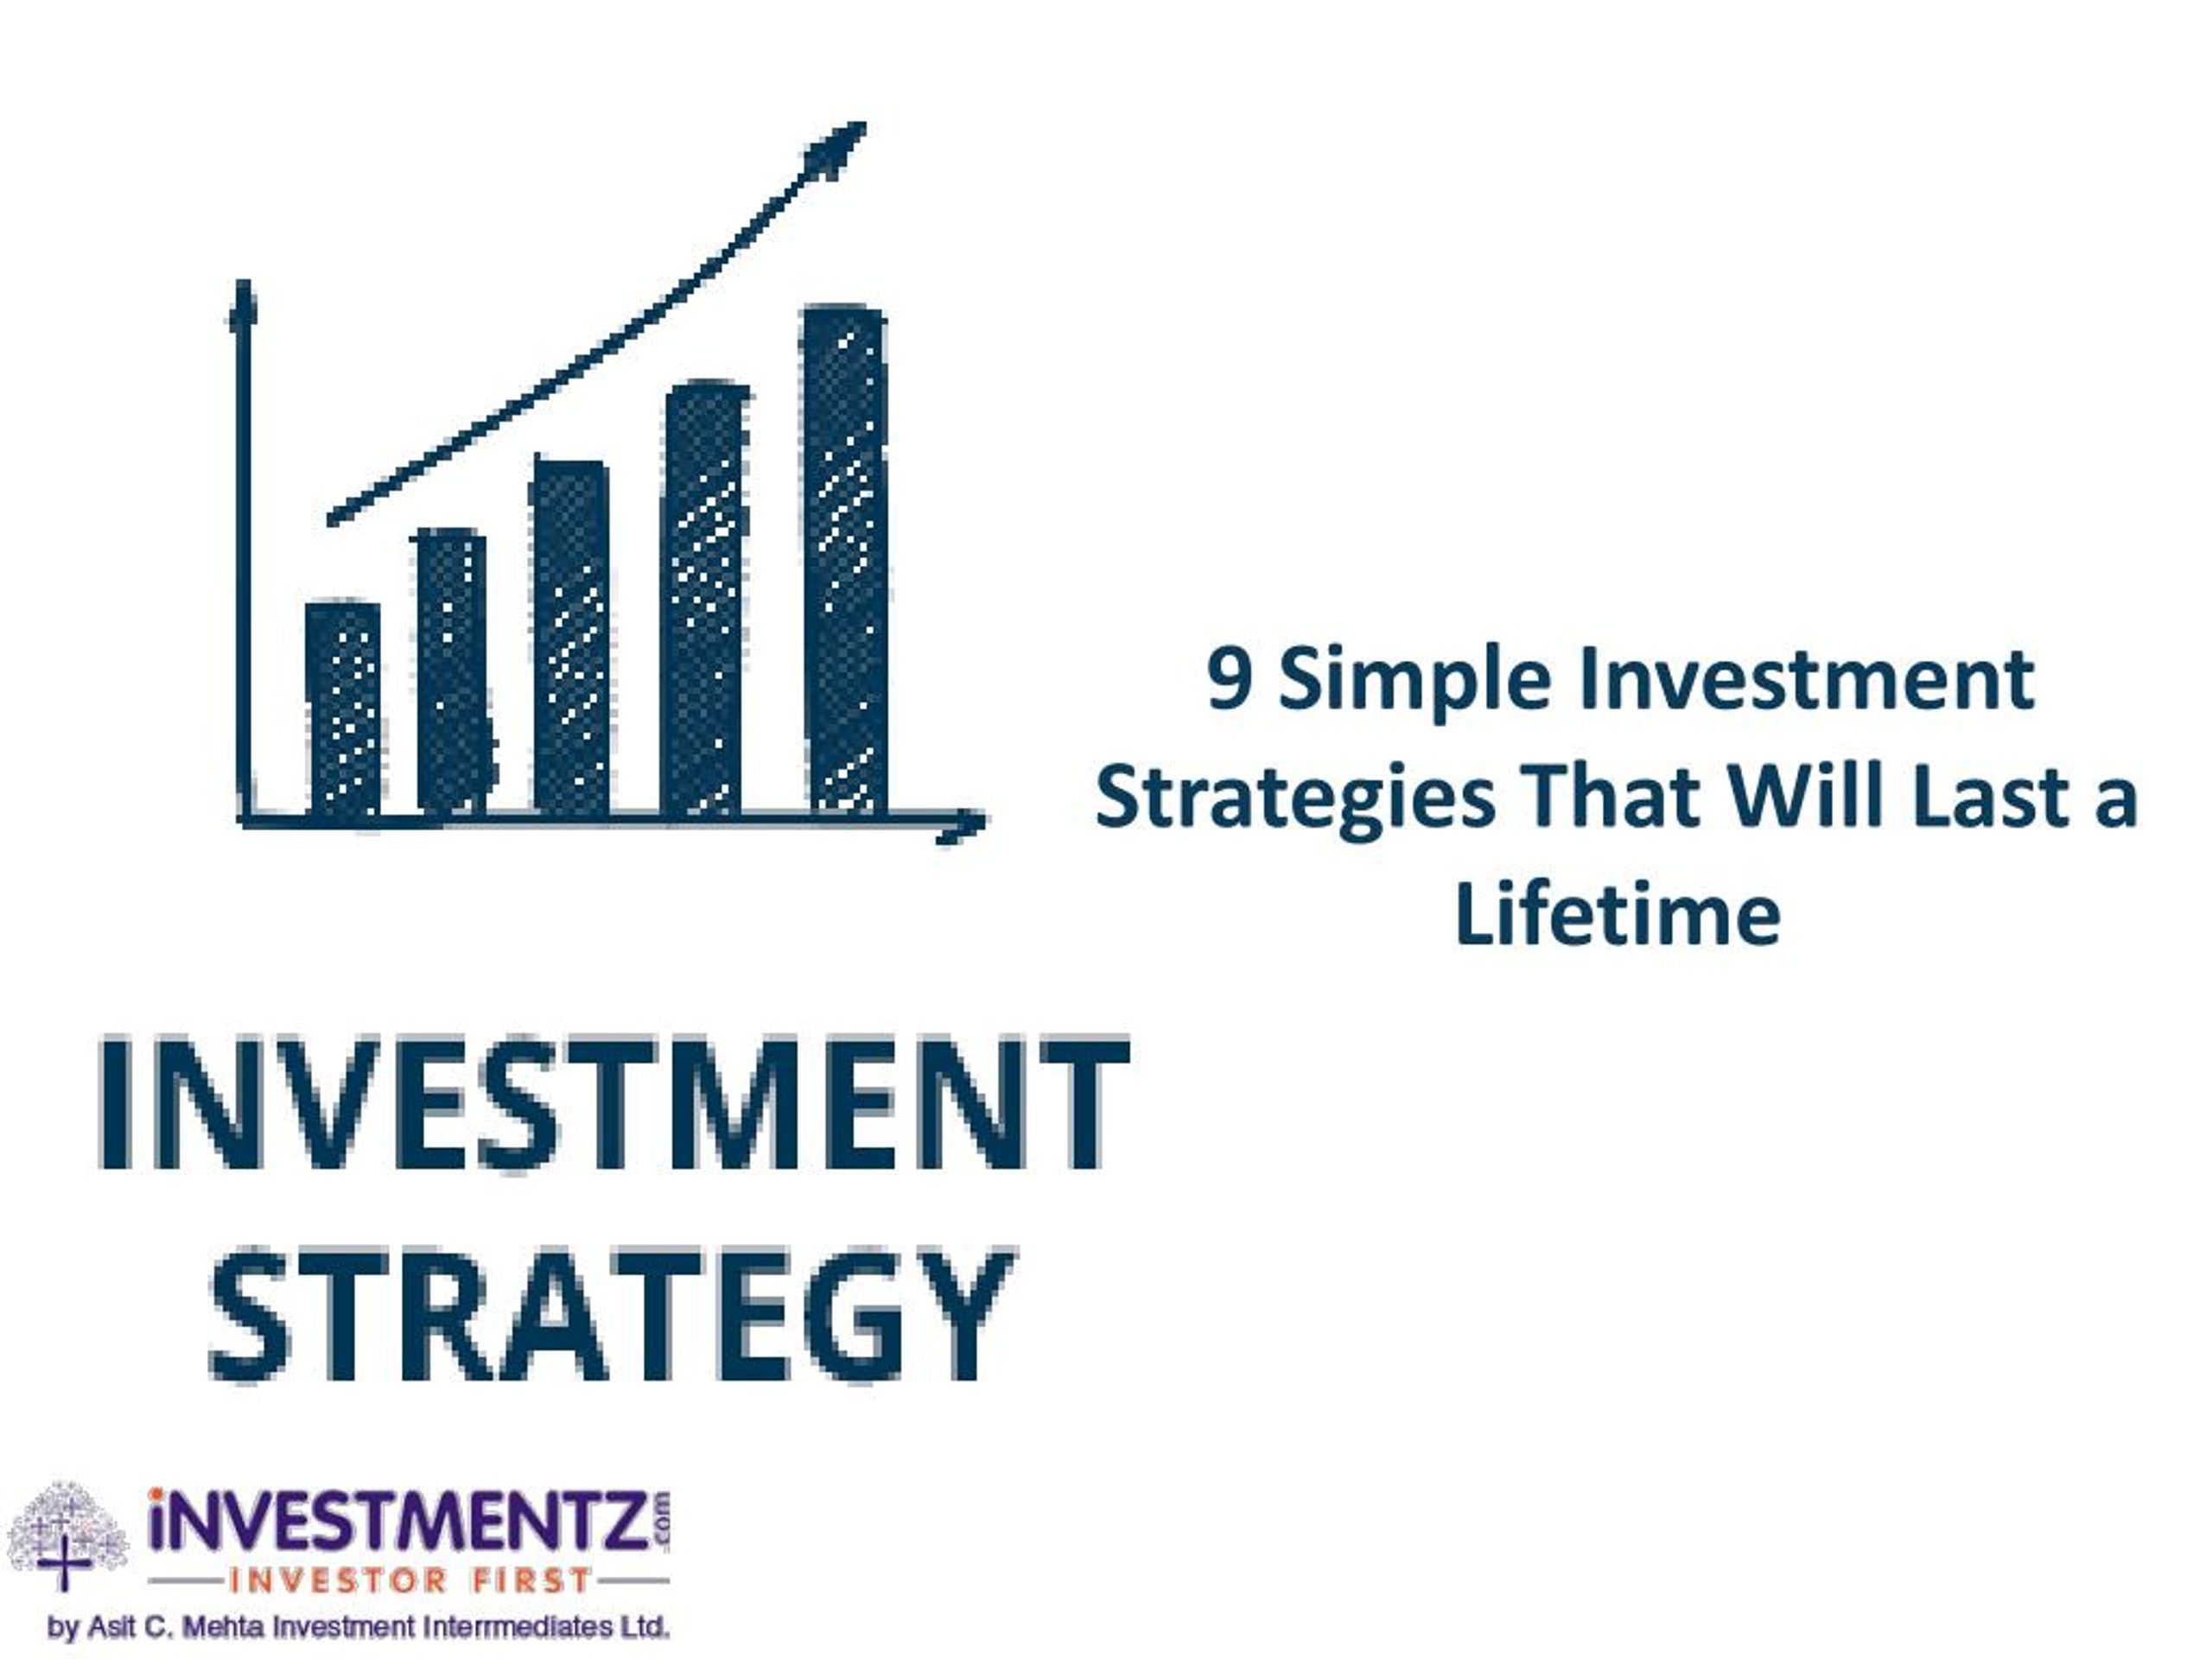 Last life time. Simply invest. Ambassador investment для презентации. Invest Strategy paper.